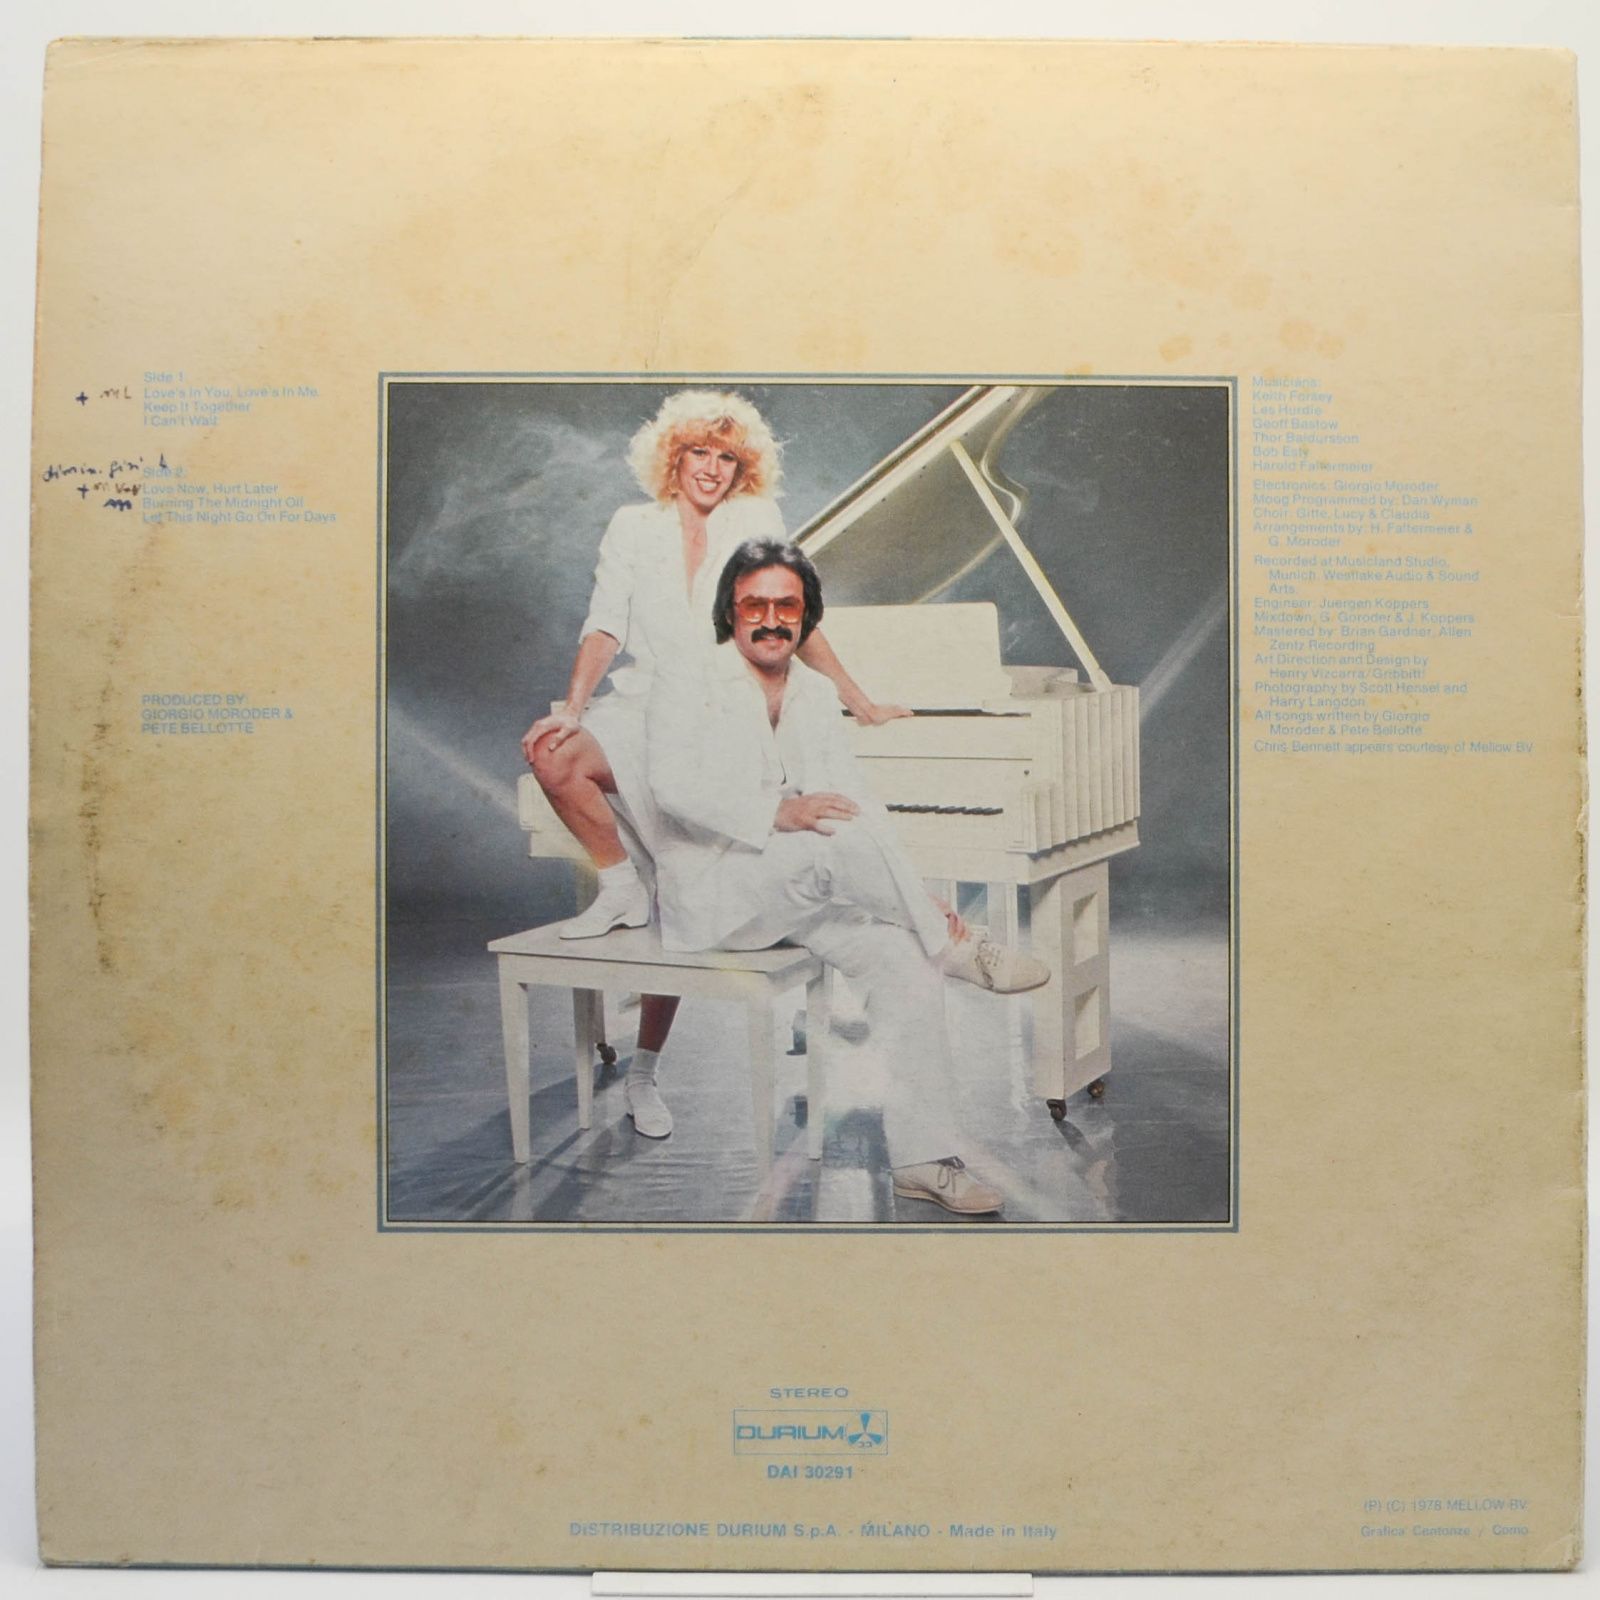 Giorgio And Chris — Love's In You, Love's In Me, 1978